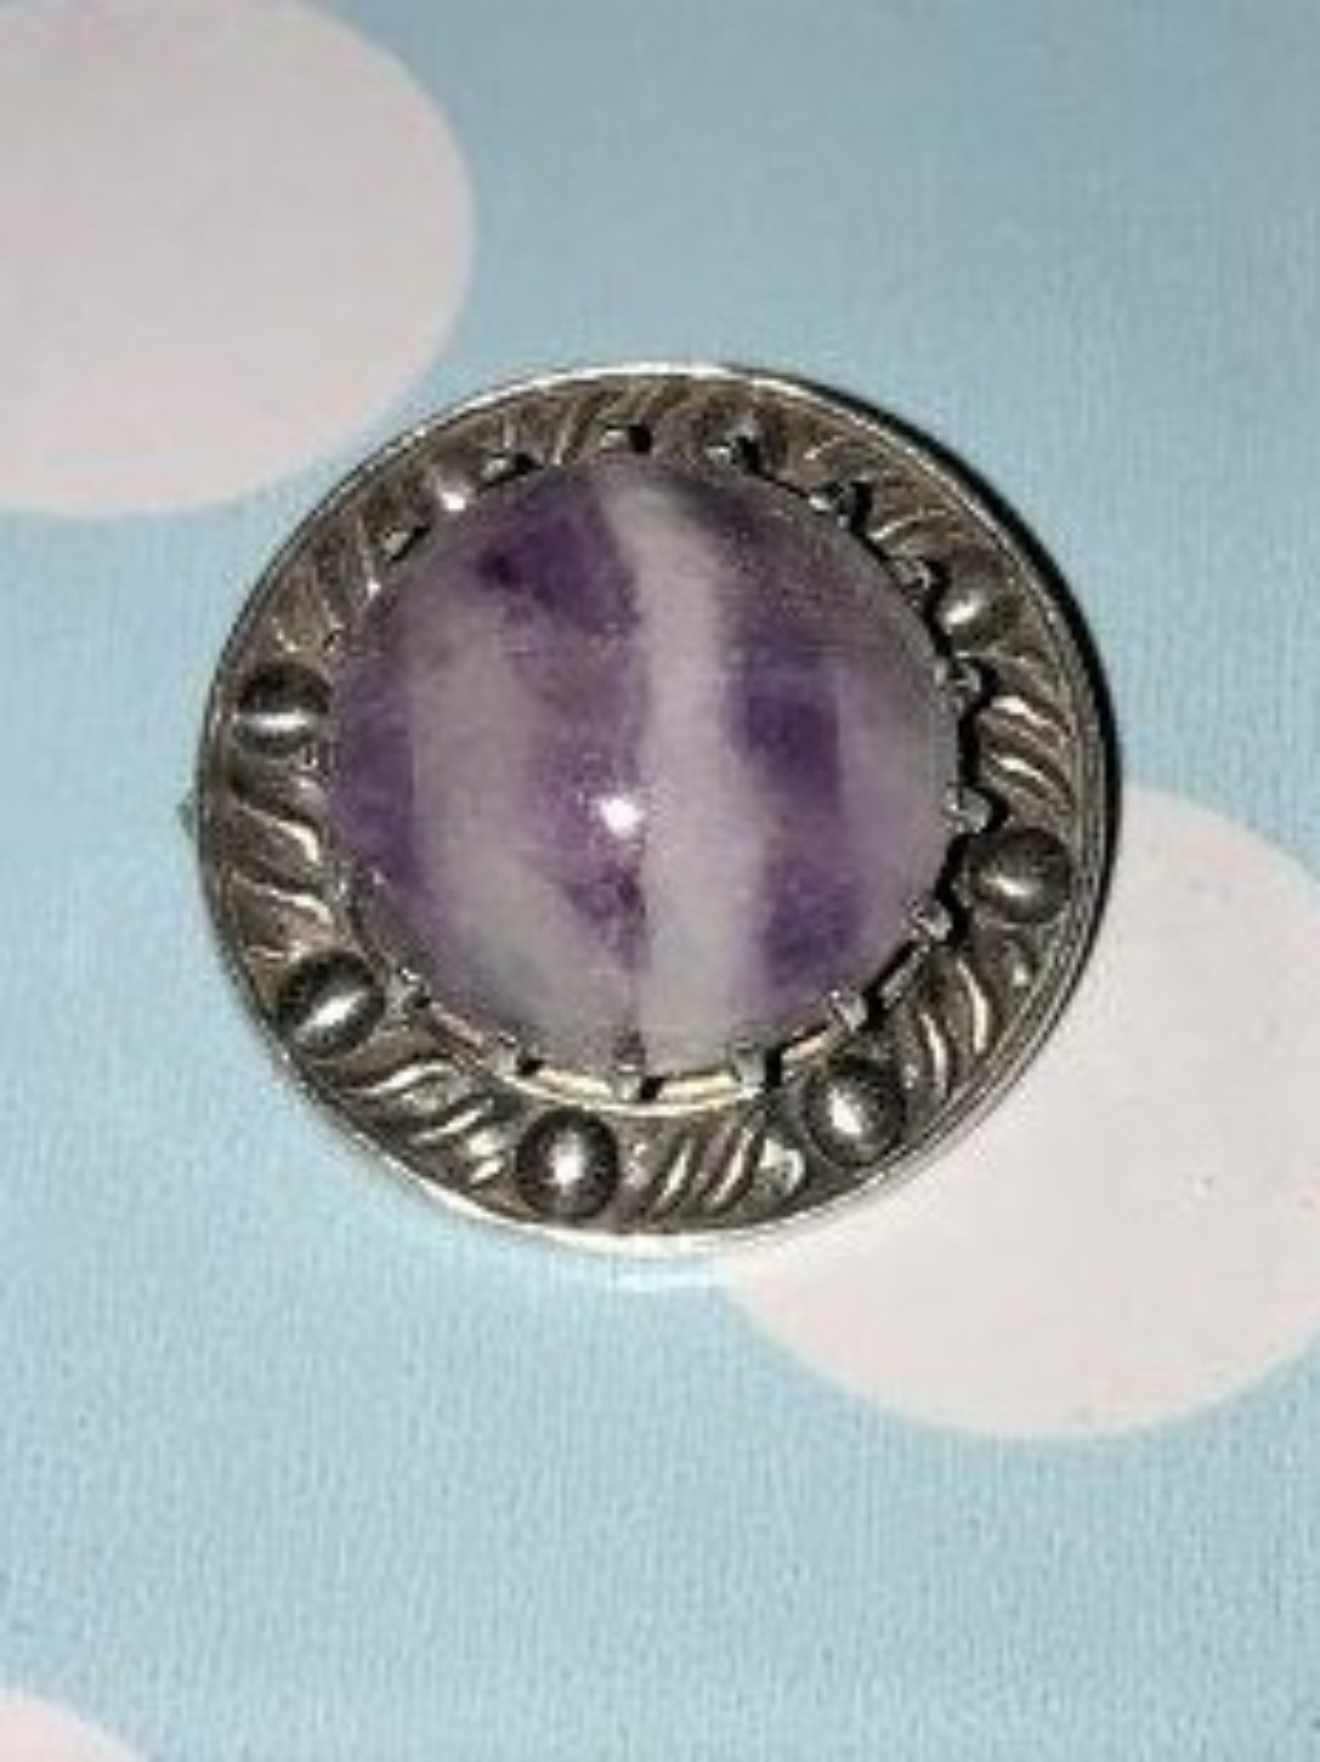 Scottish Silver and Agate Brooch